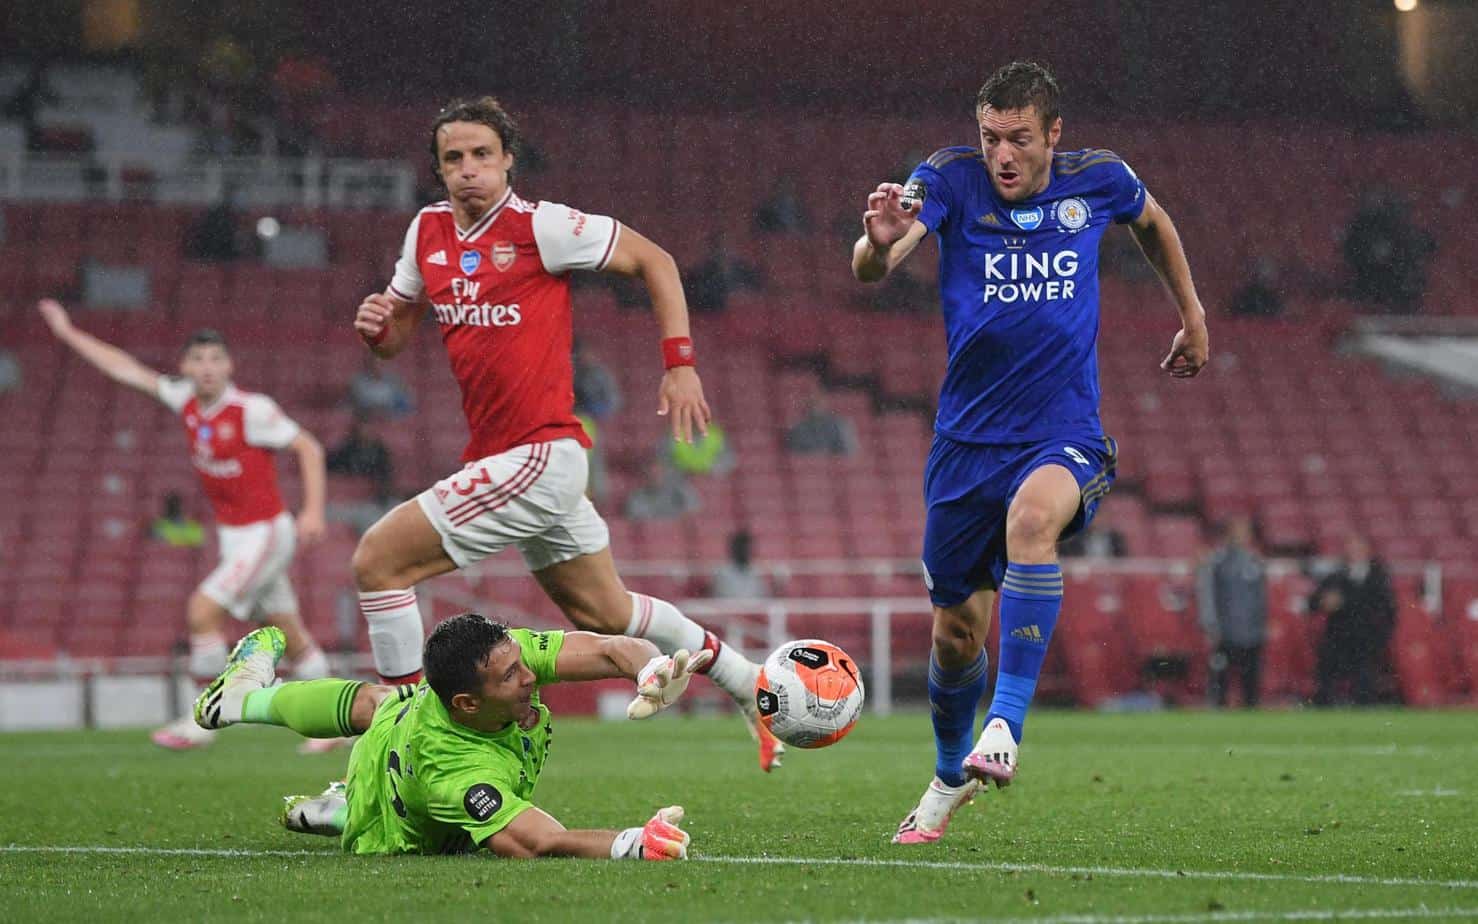 Leicester City vs. Arsenal – Predictions and Free Picks